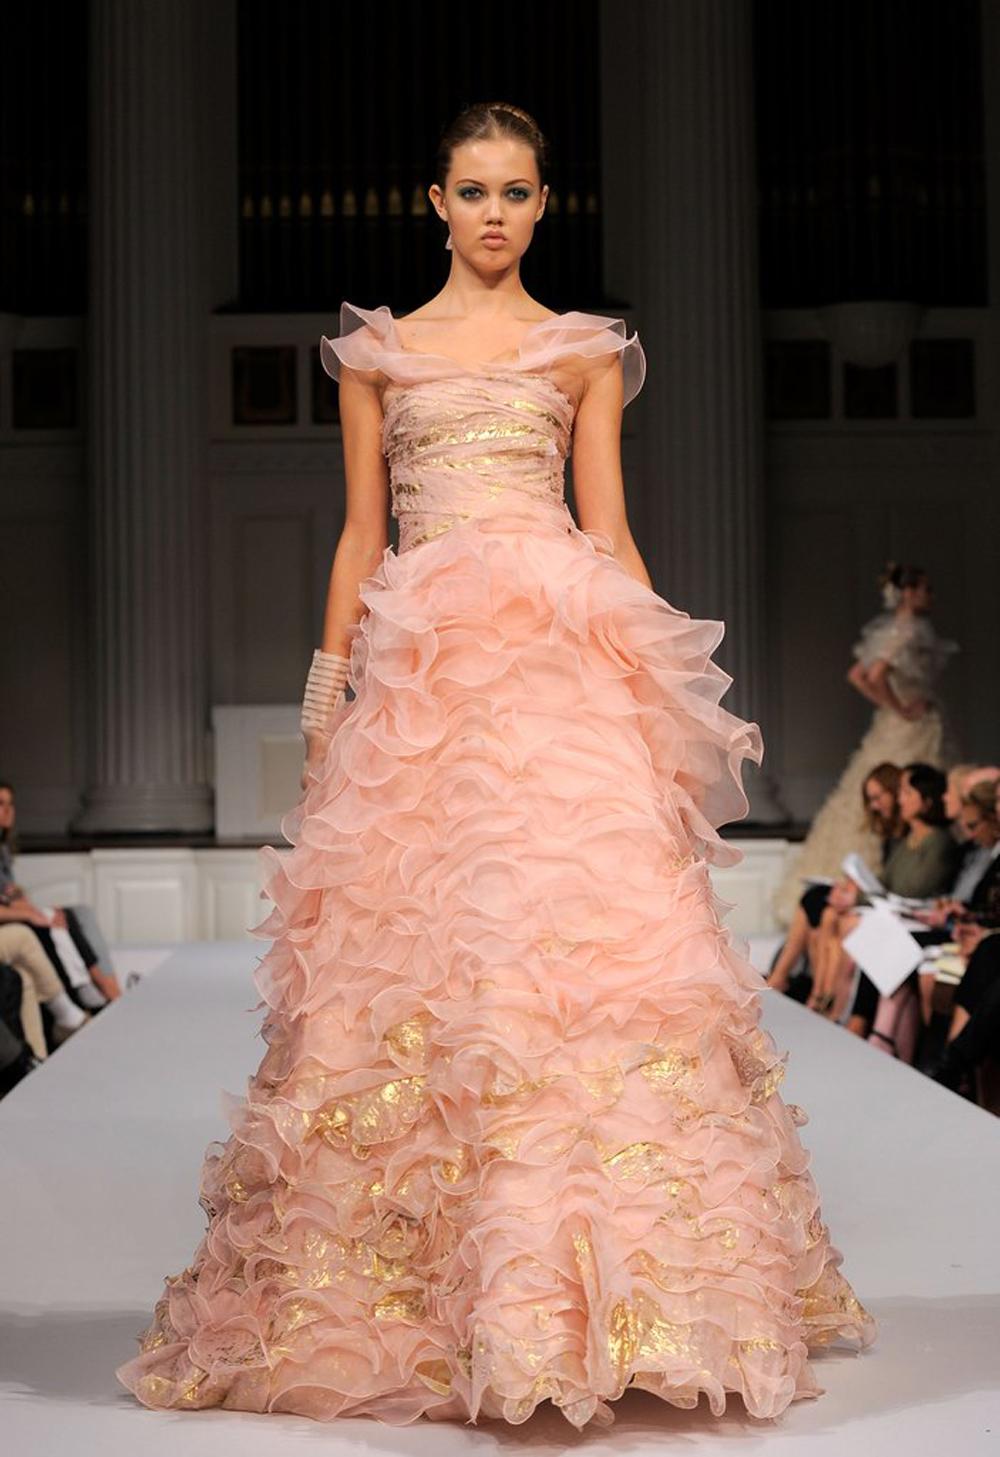 New Oscar De La Renta Runway Silk Pink Dress Gown
As an added value for this dress whether you are a collector or just like to wear high end fashion this piece was featured in the 2016 Oscar de la Renta retrospective exhibition  at the de Young